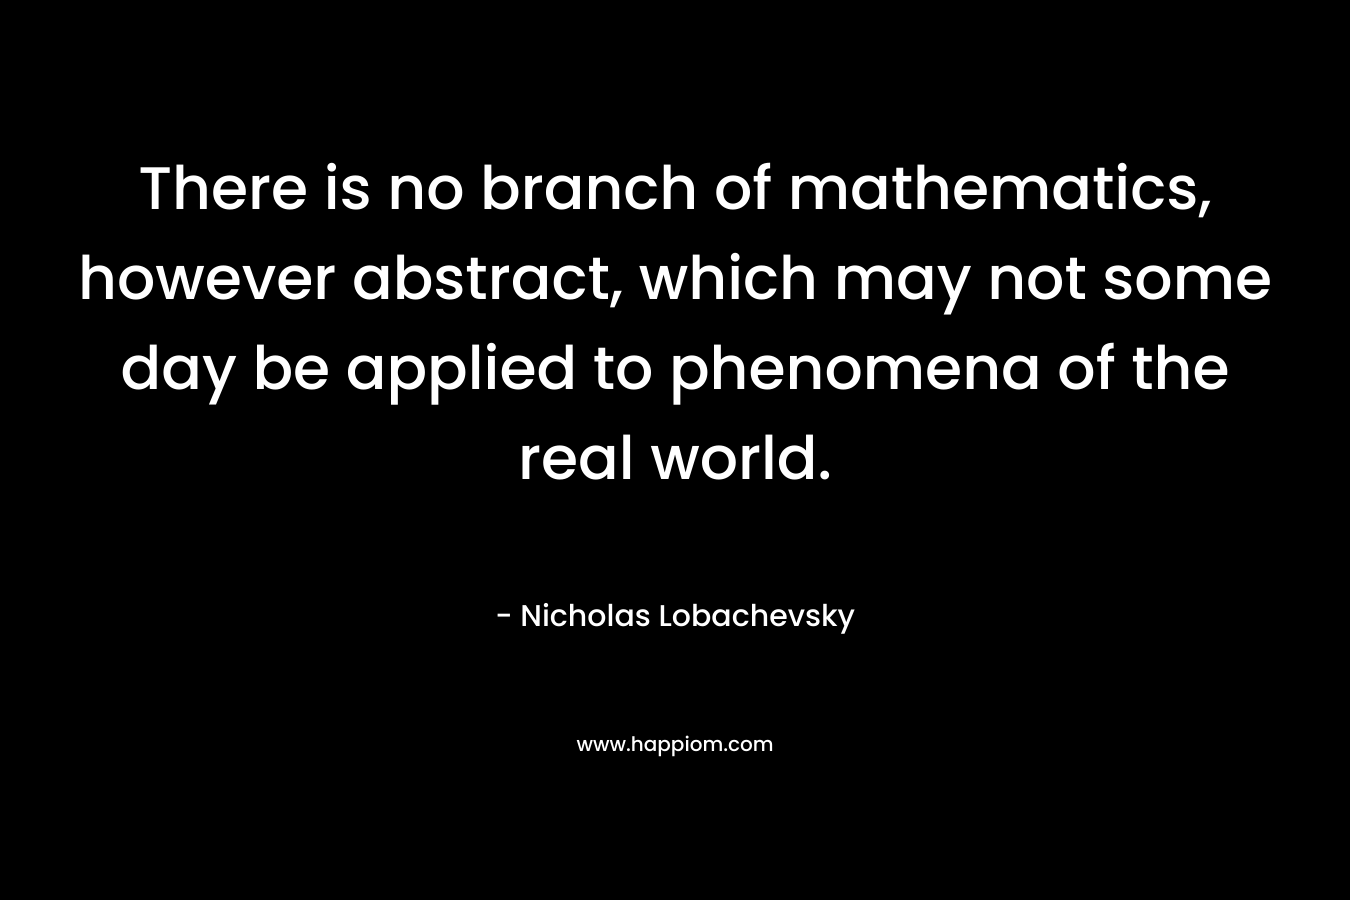 There is no branch of mathematics, however abstract, which may not some day be applied to phenomena of the real world.